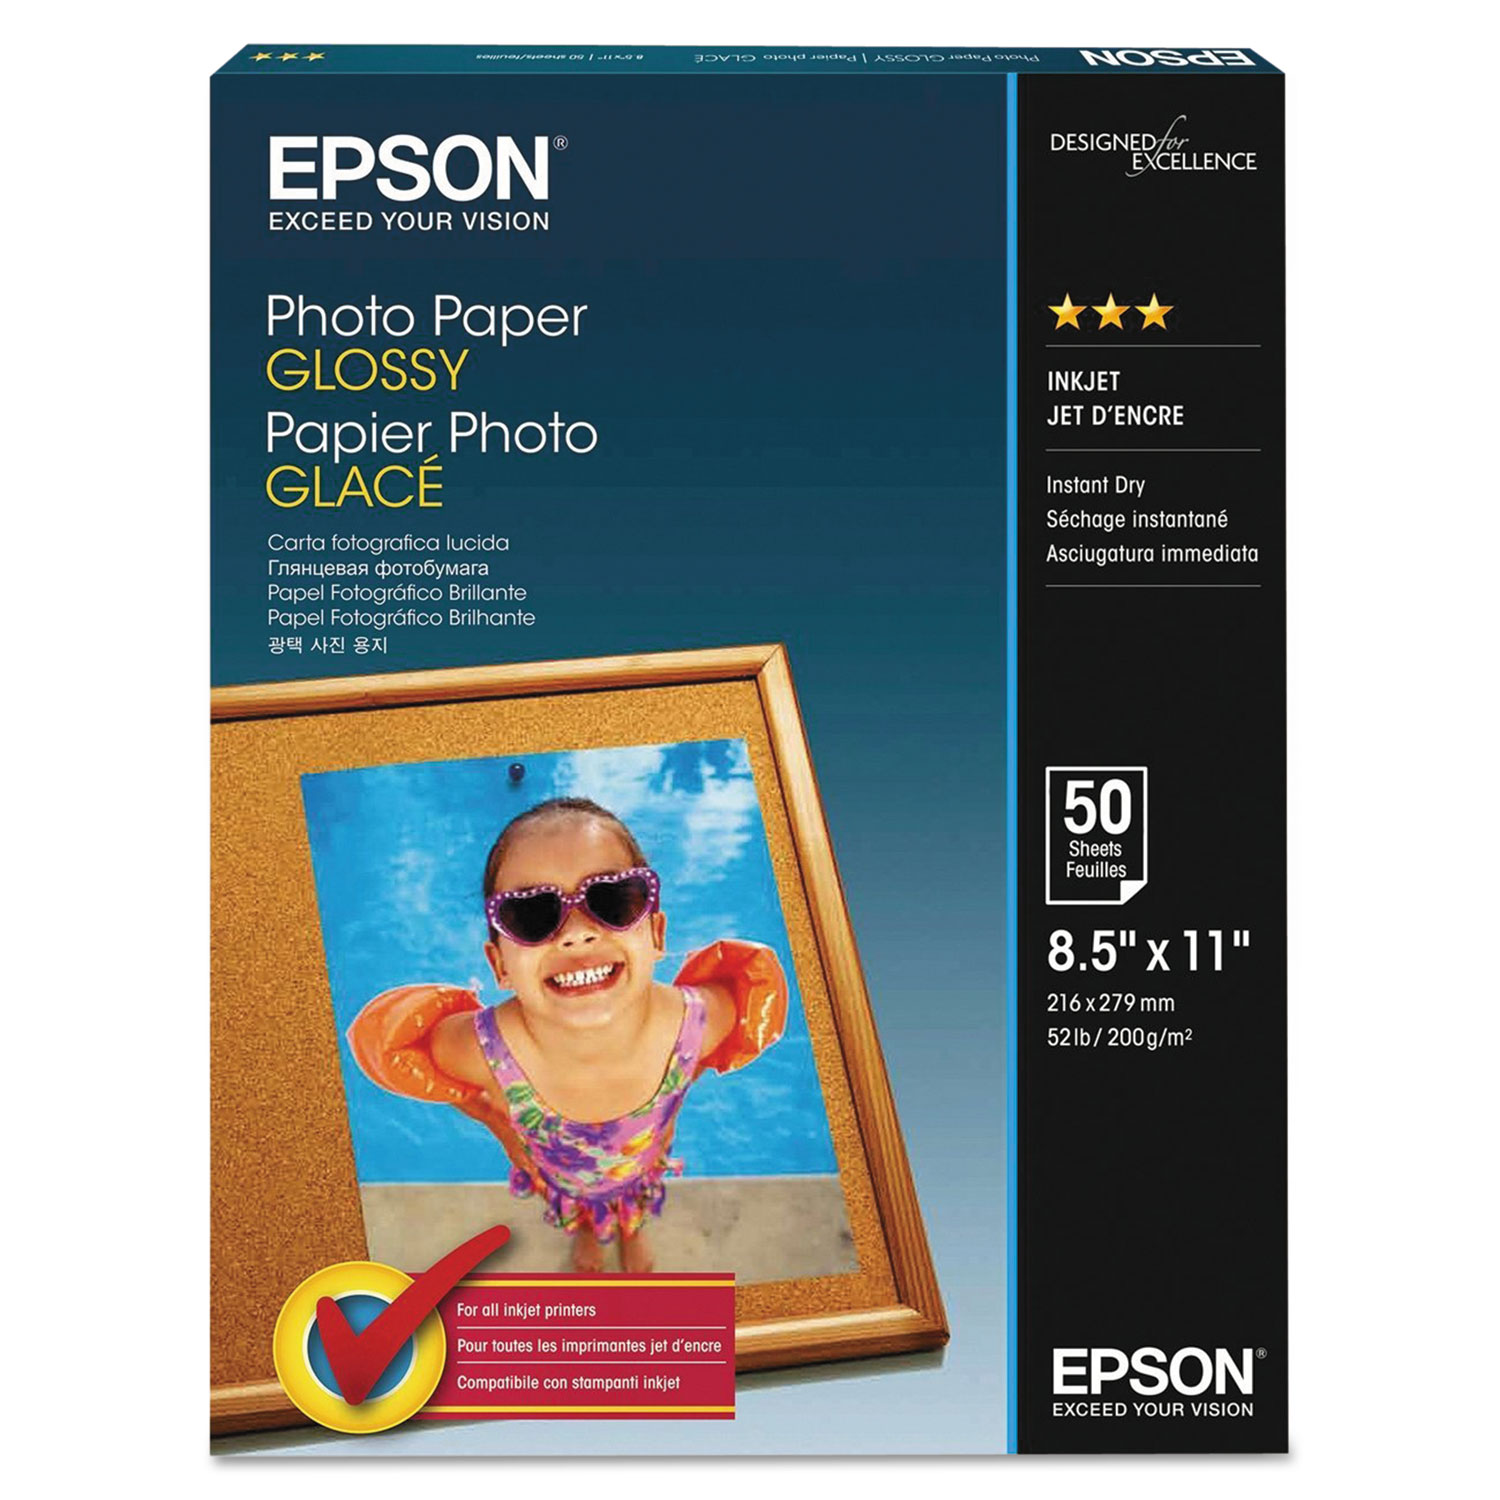 Glossy Photo Paper, 52 lbs, Glossy, 8-1/2 x 11, 100 Sheets/Pack